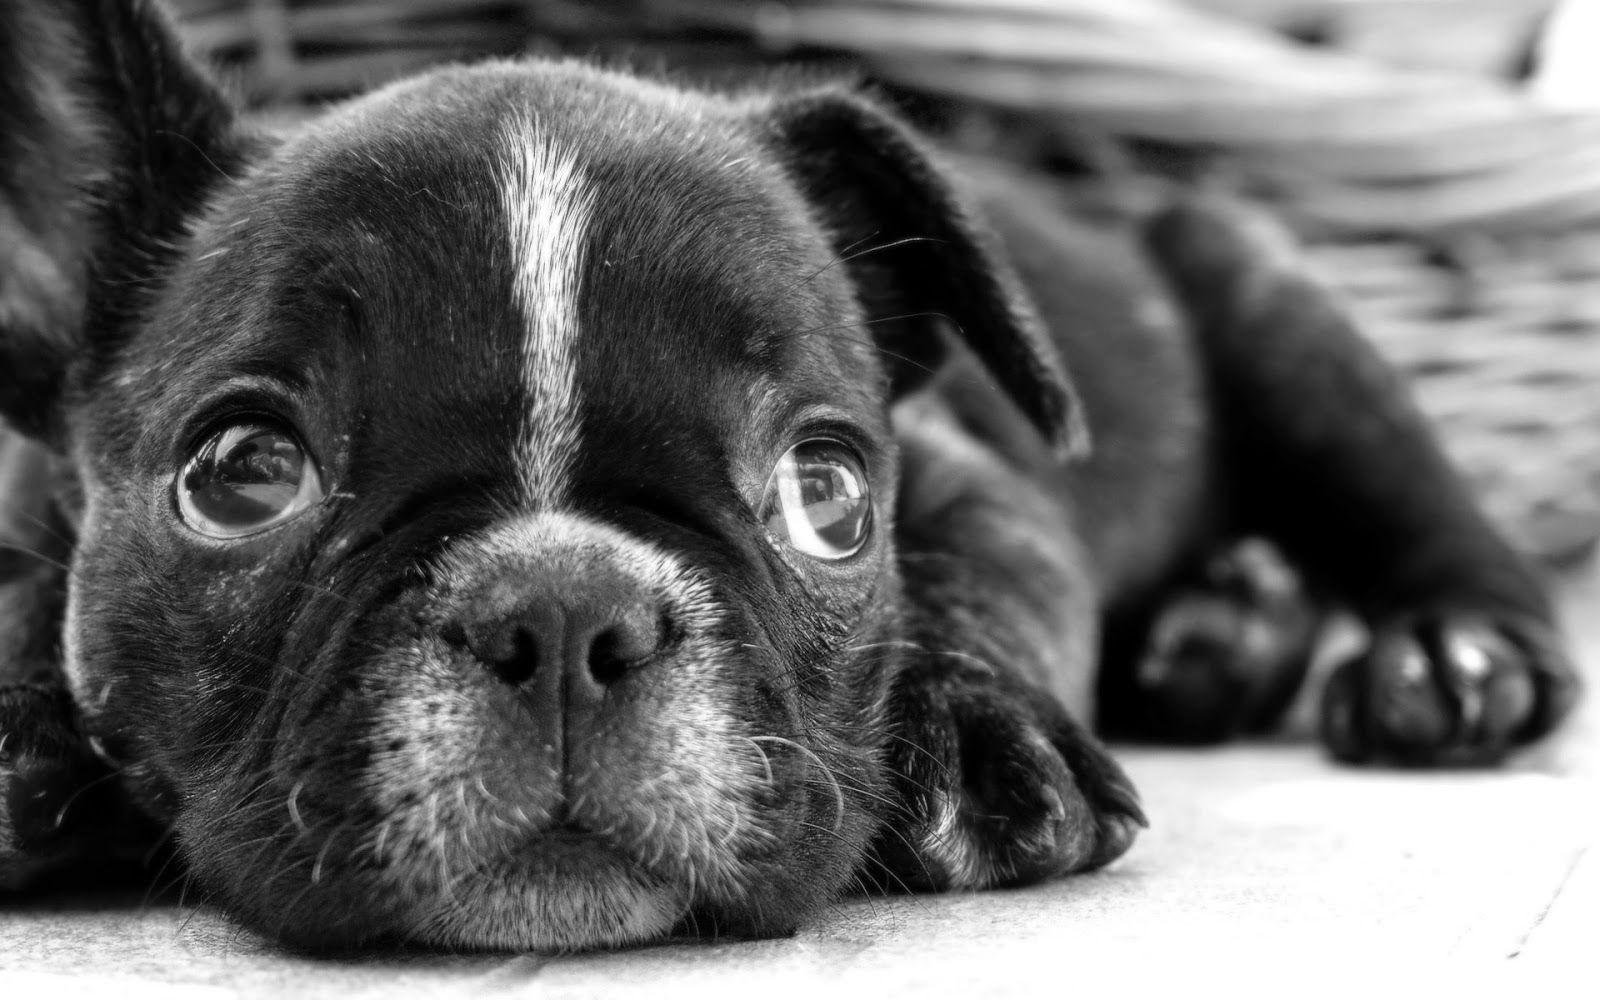 The dog in world: Black boxer puppy wallpaper so lovely with the sad eye